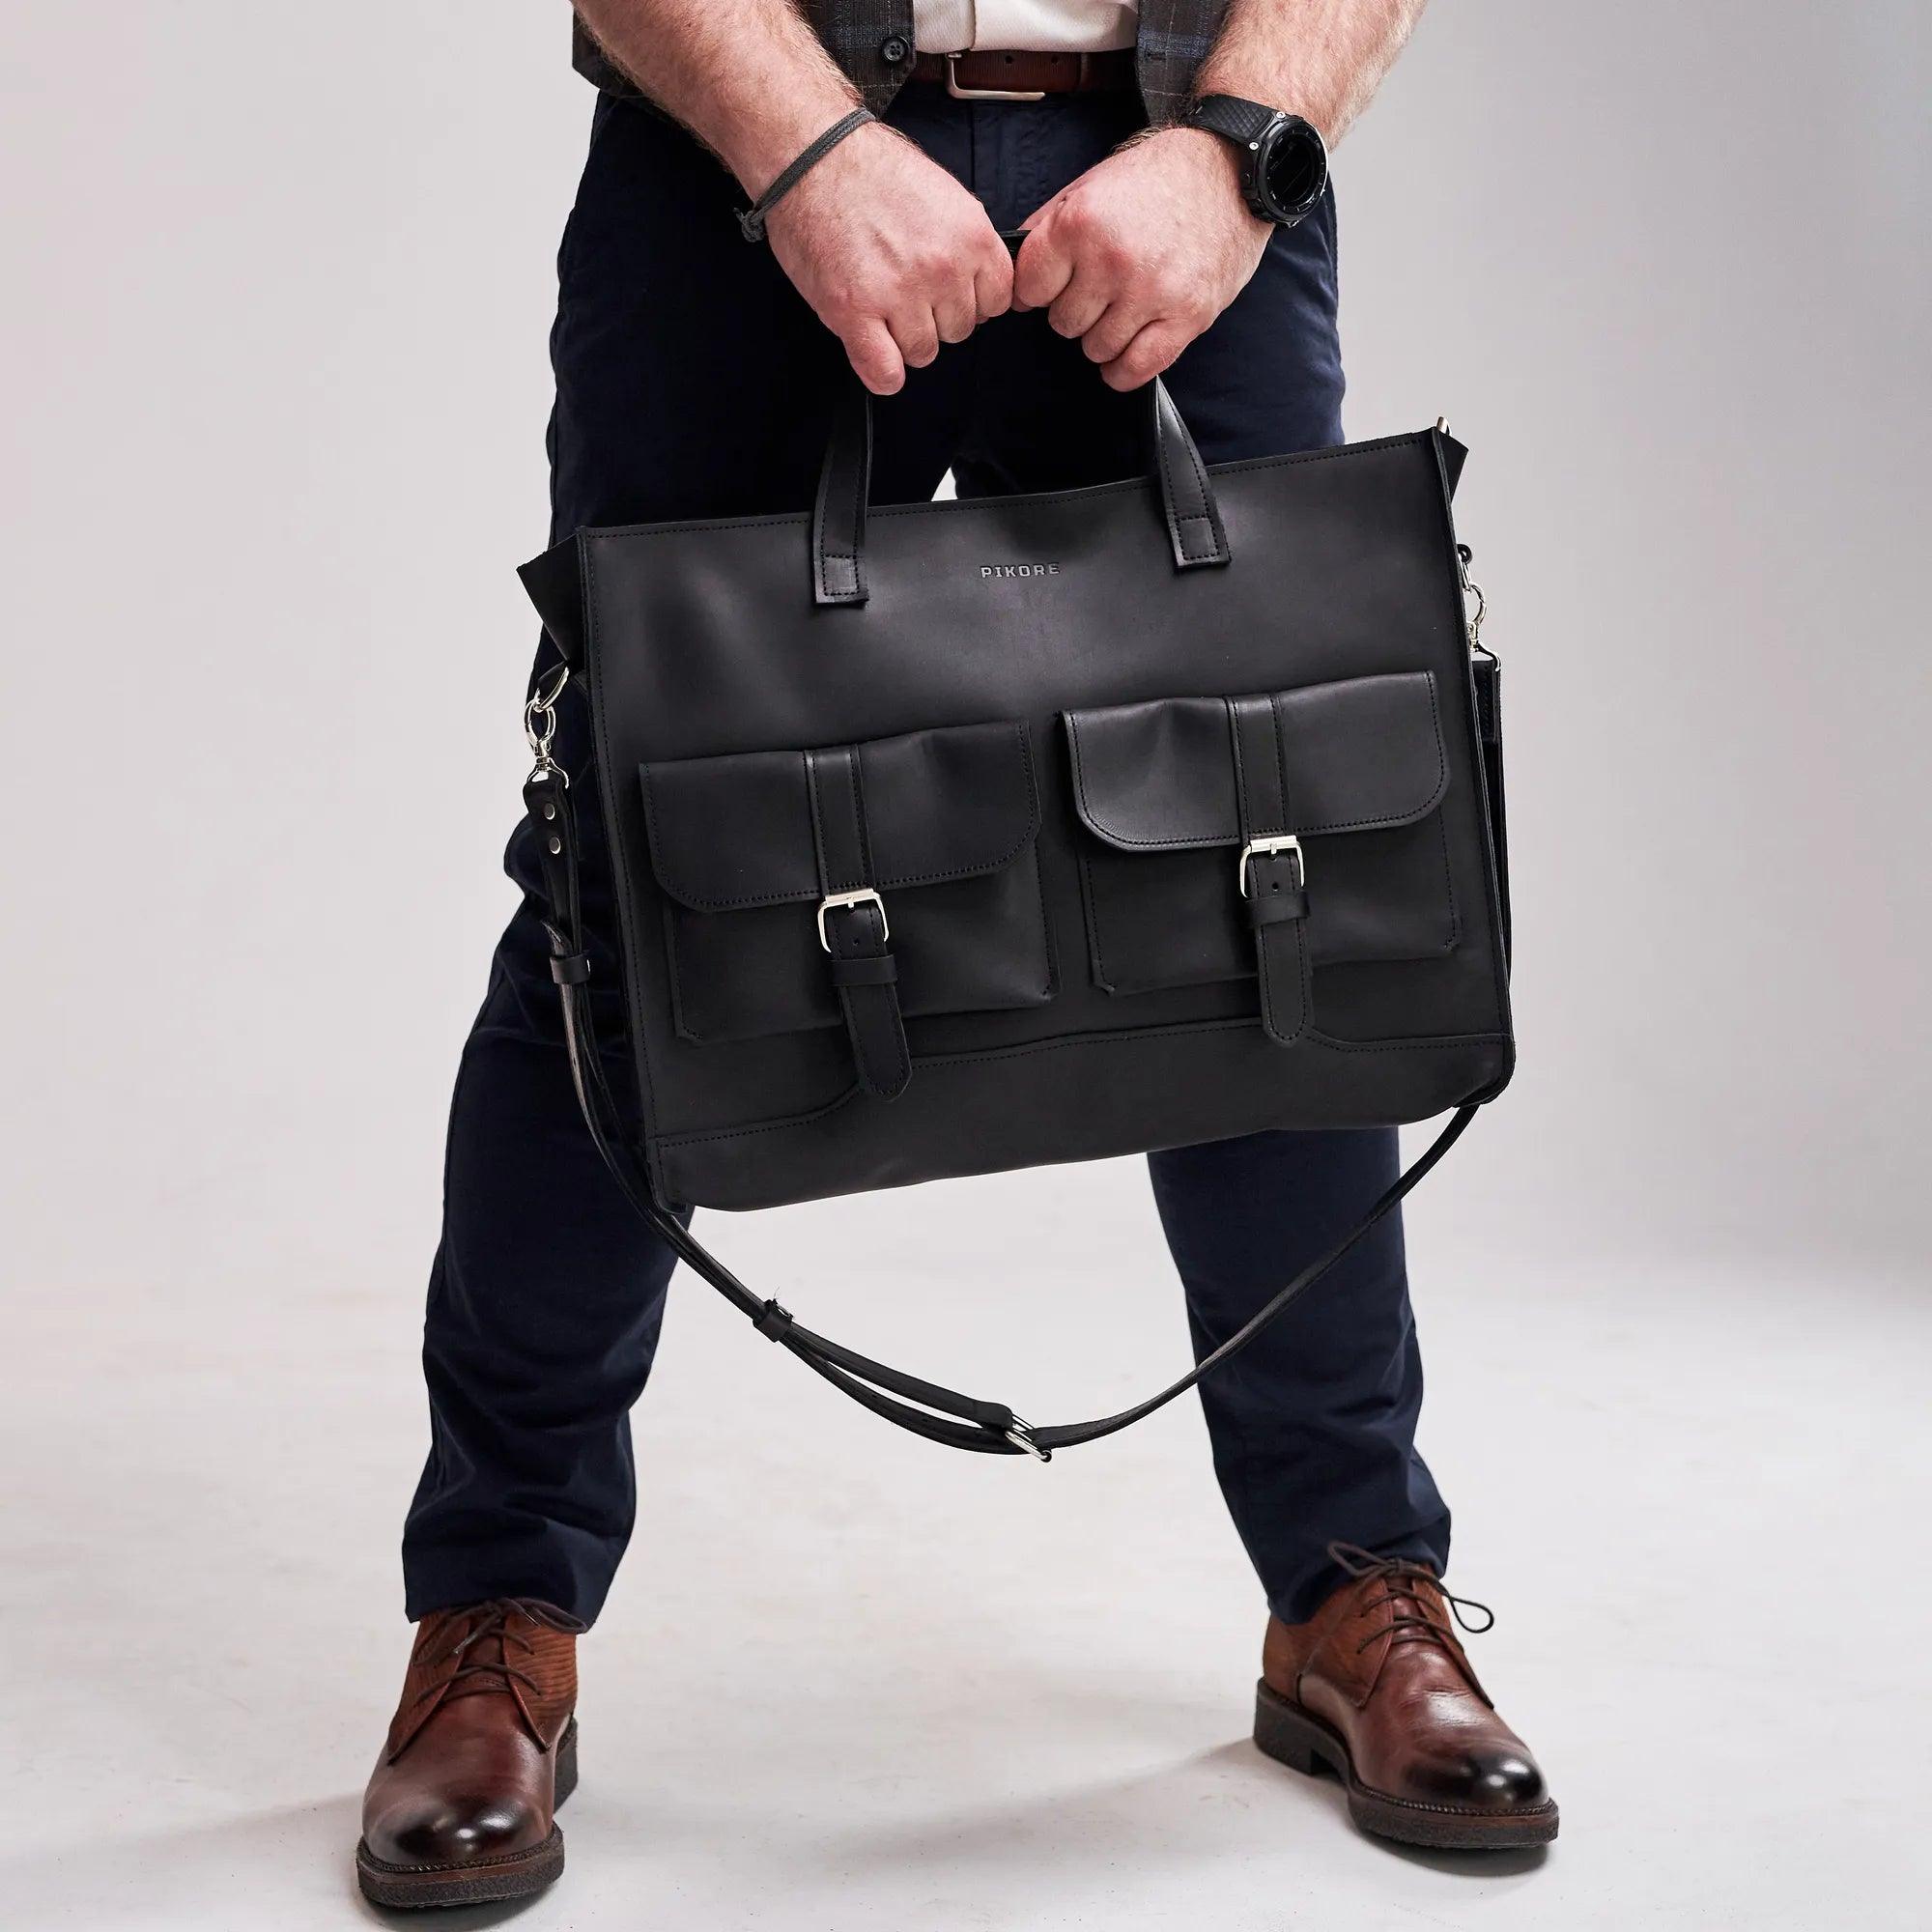 Carryall Leather Bag - Pikore